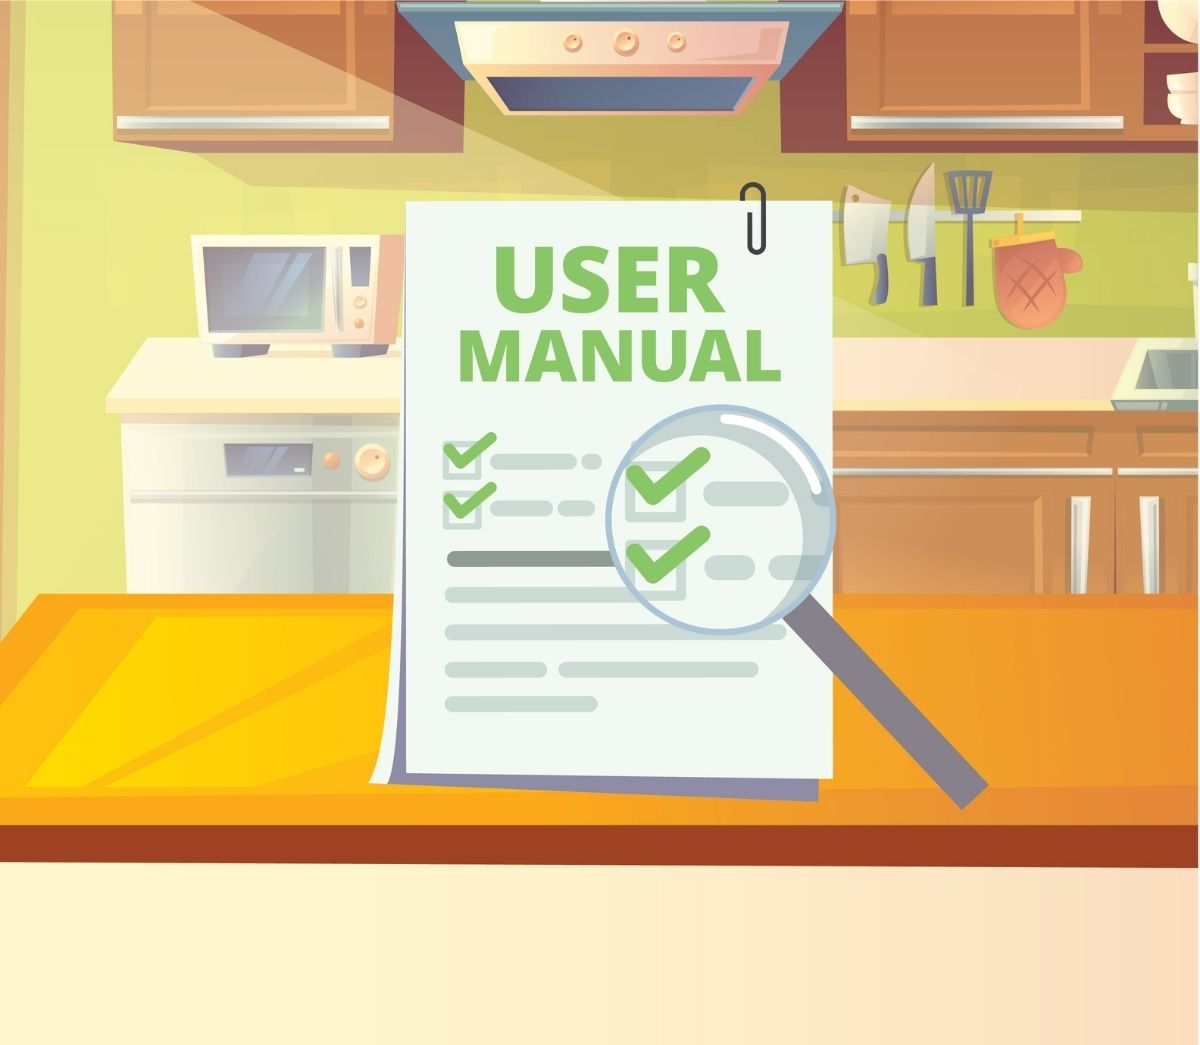 read the user manual